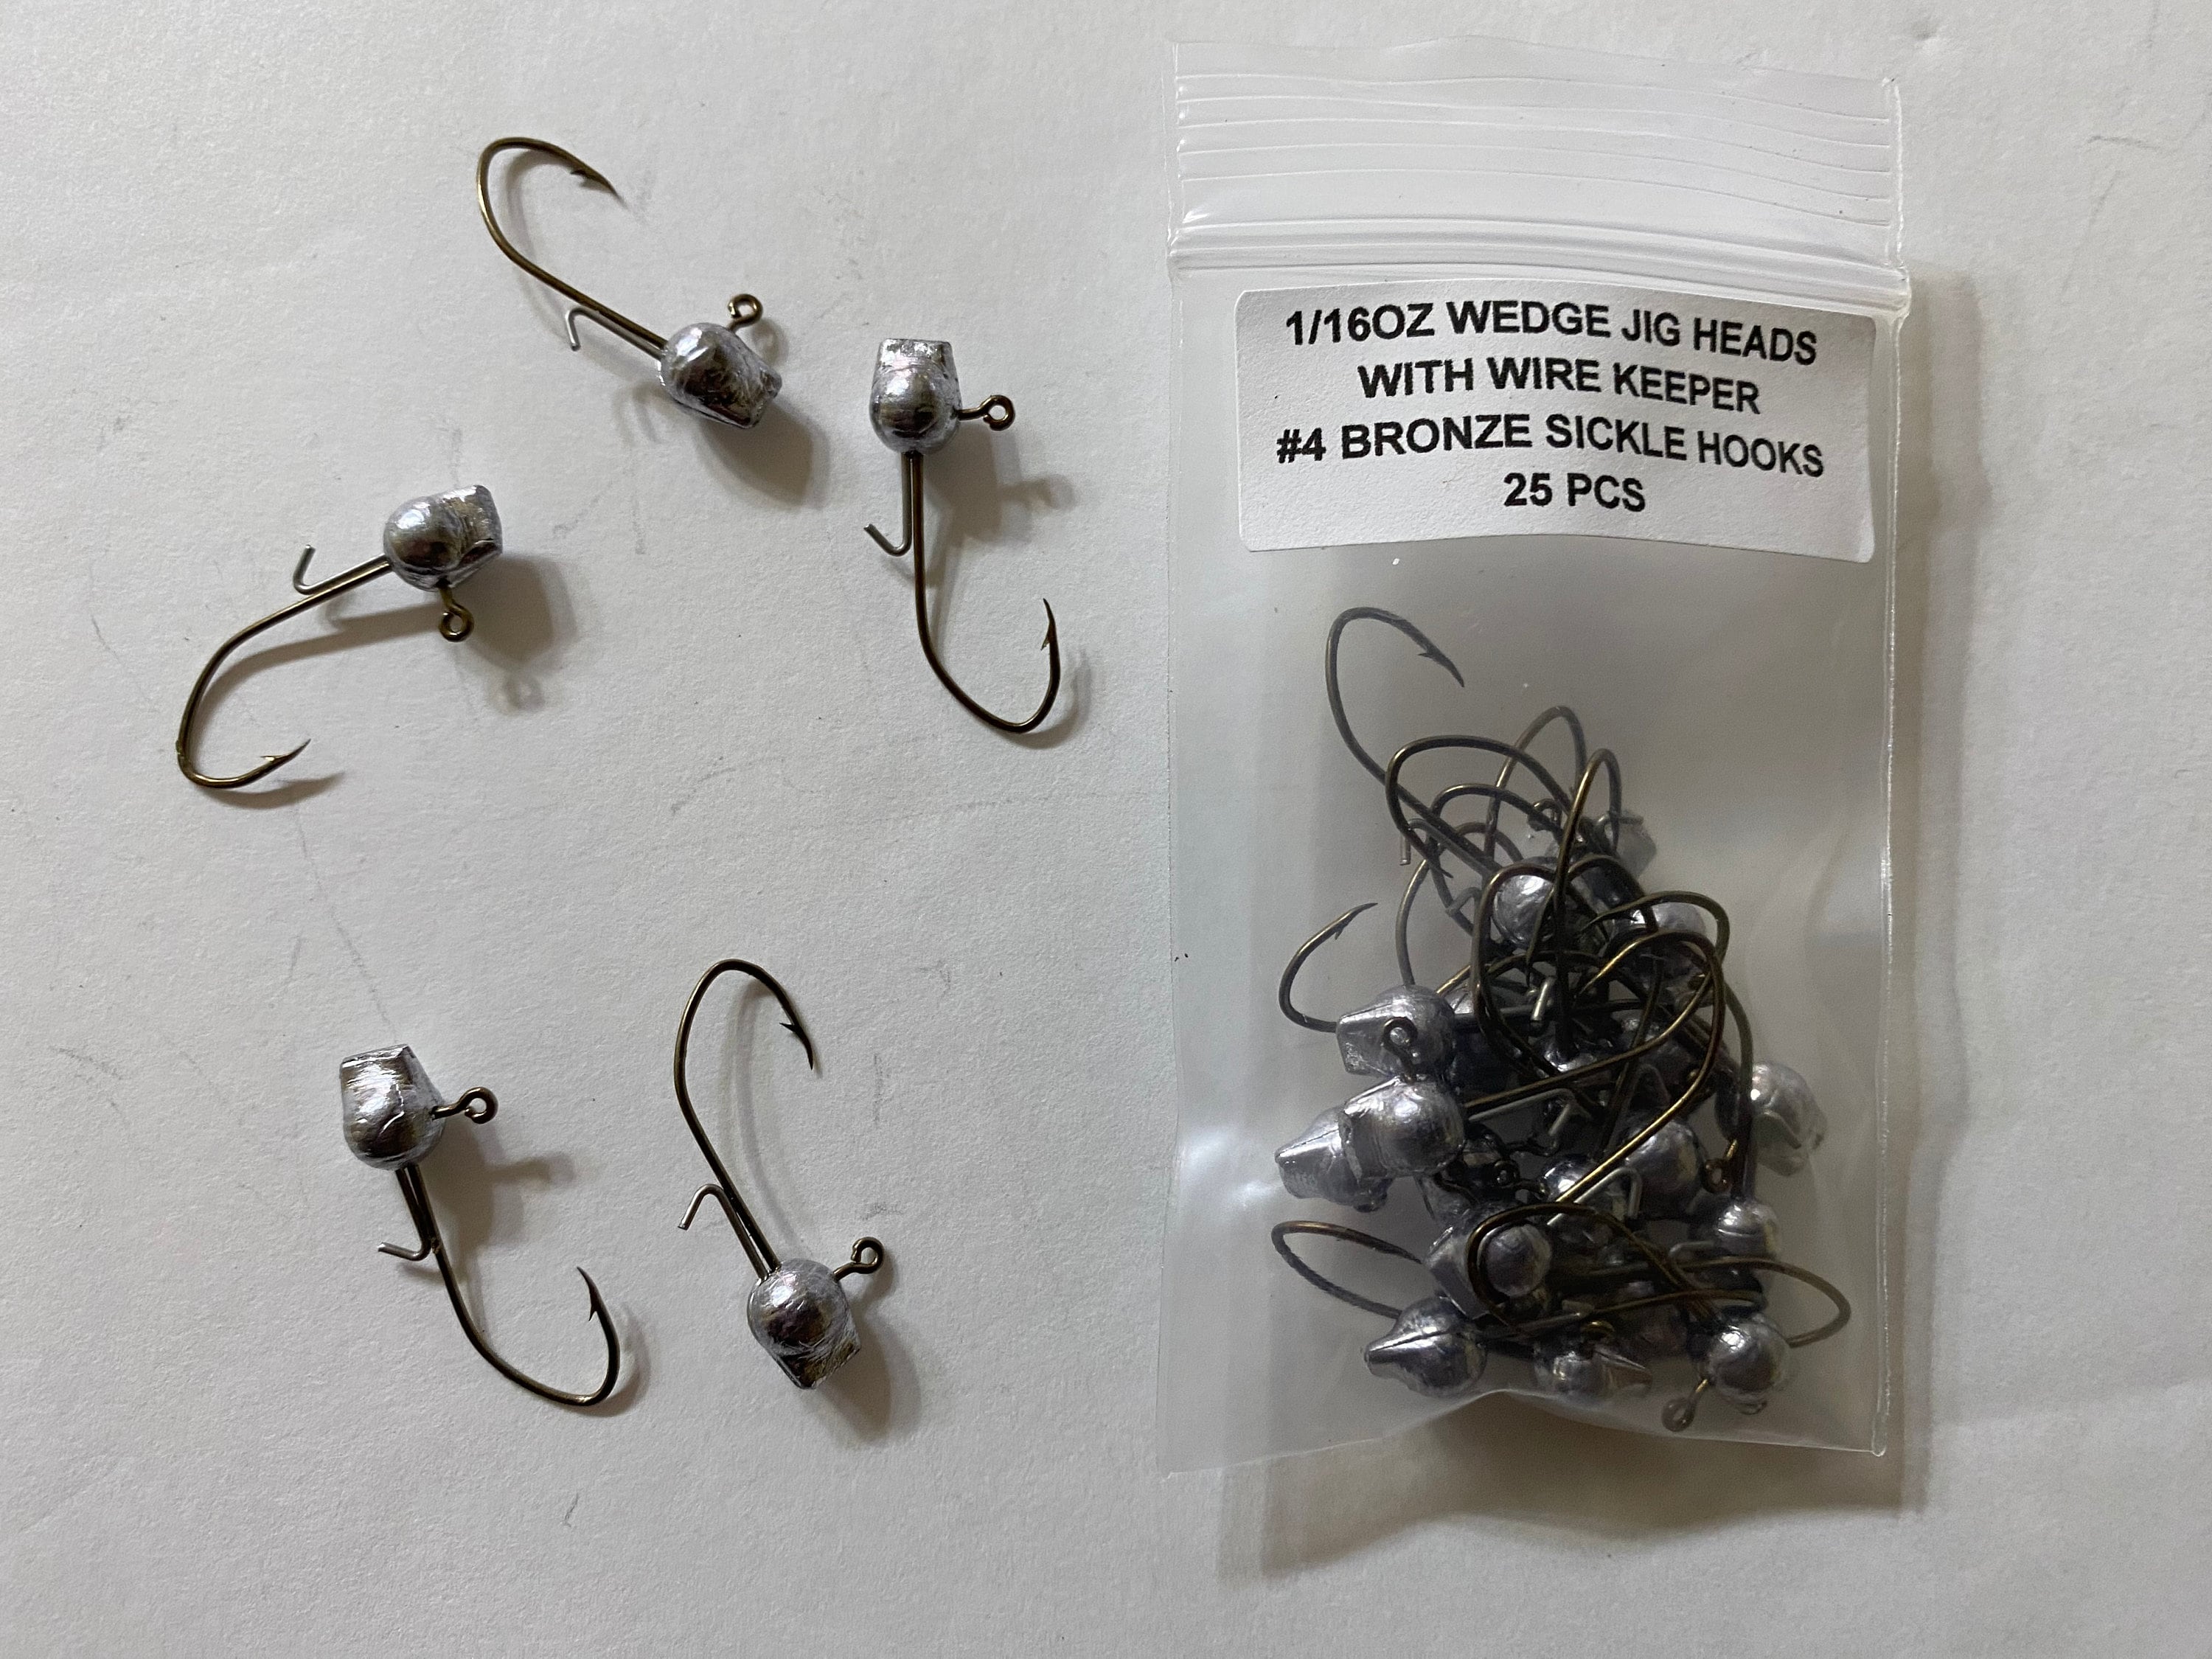 25 Pcs Unpainted Wedge Head Jigs With Wire Keeper 